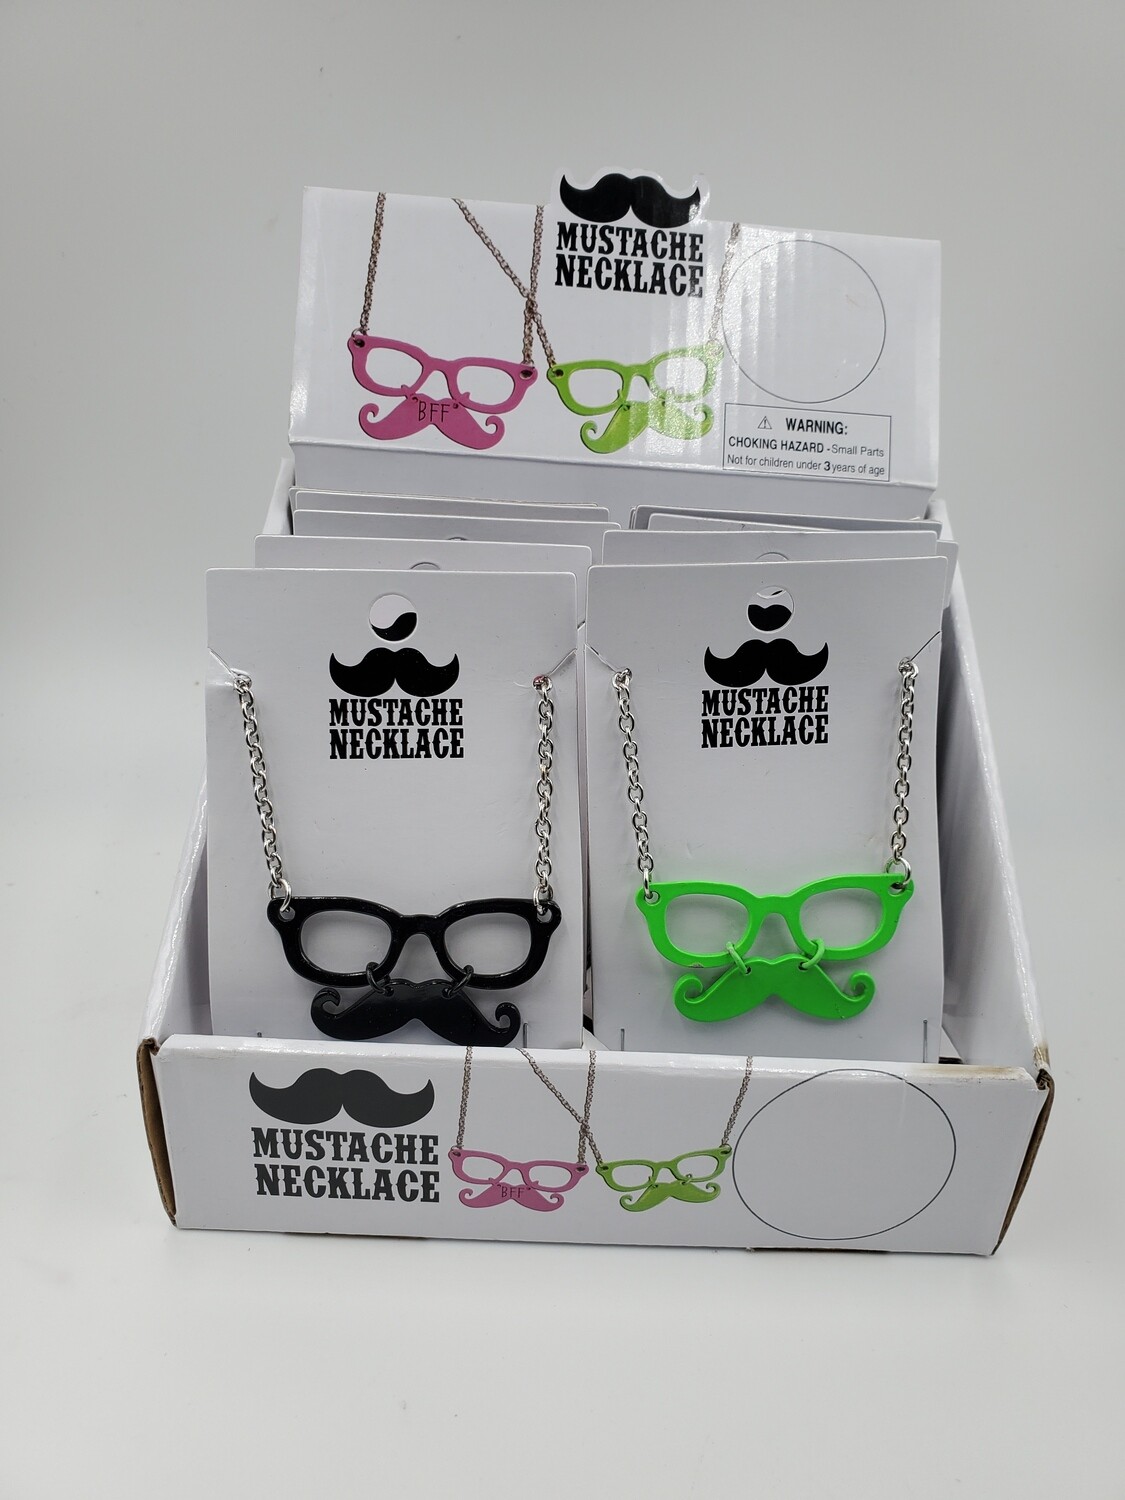 Display: Mustache Necklace (12 pc)